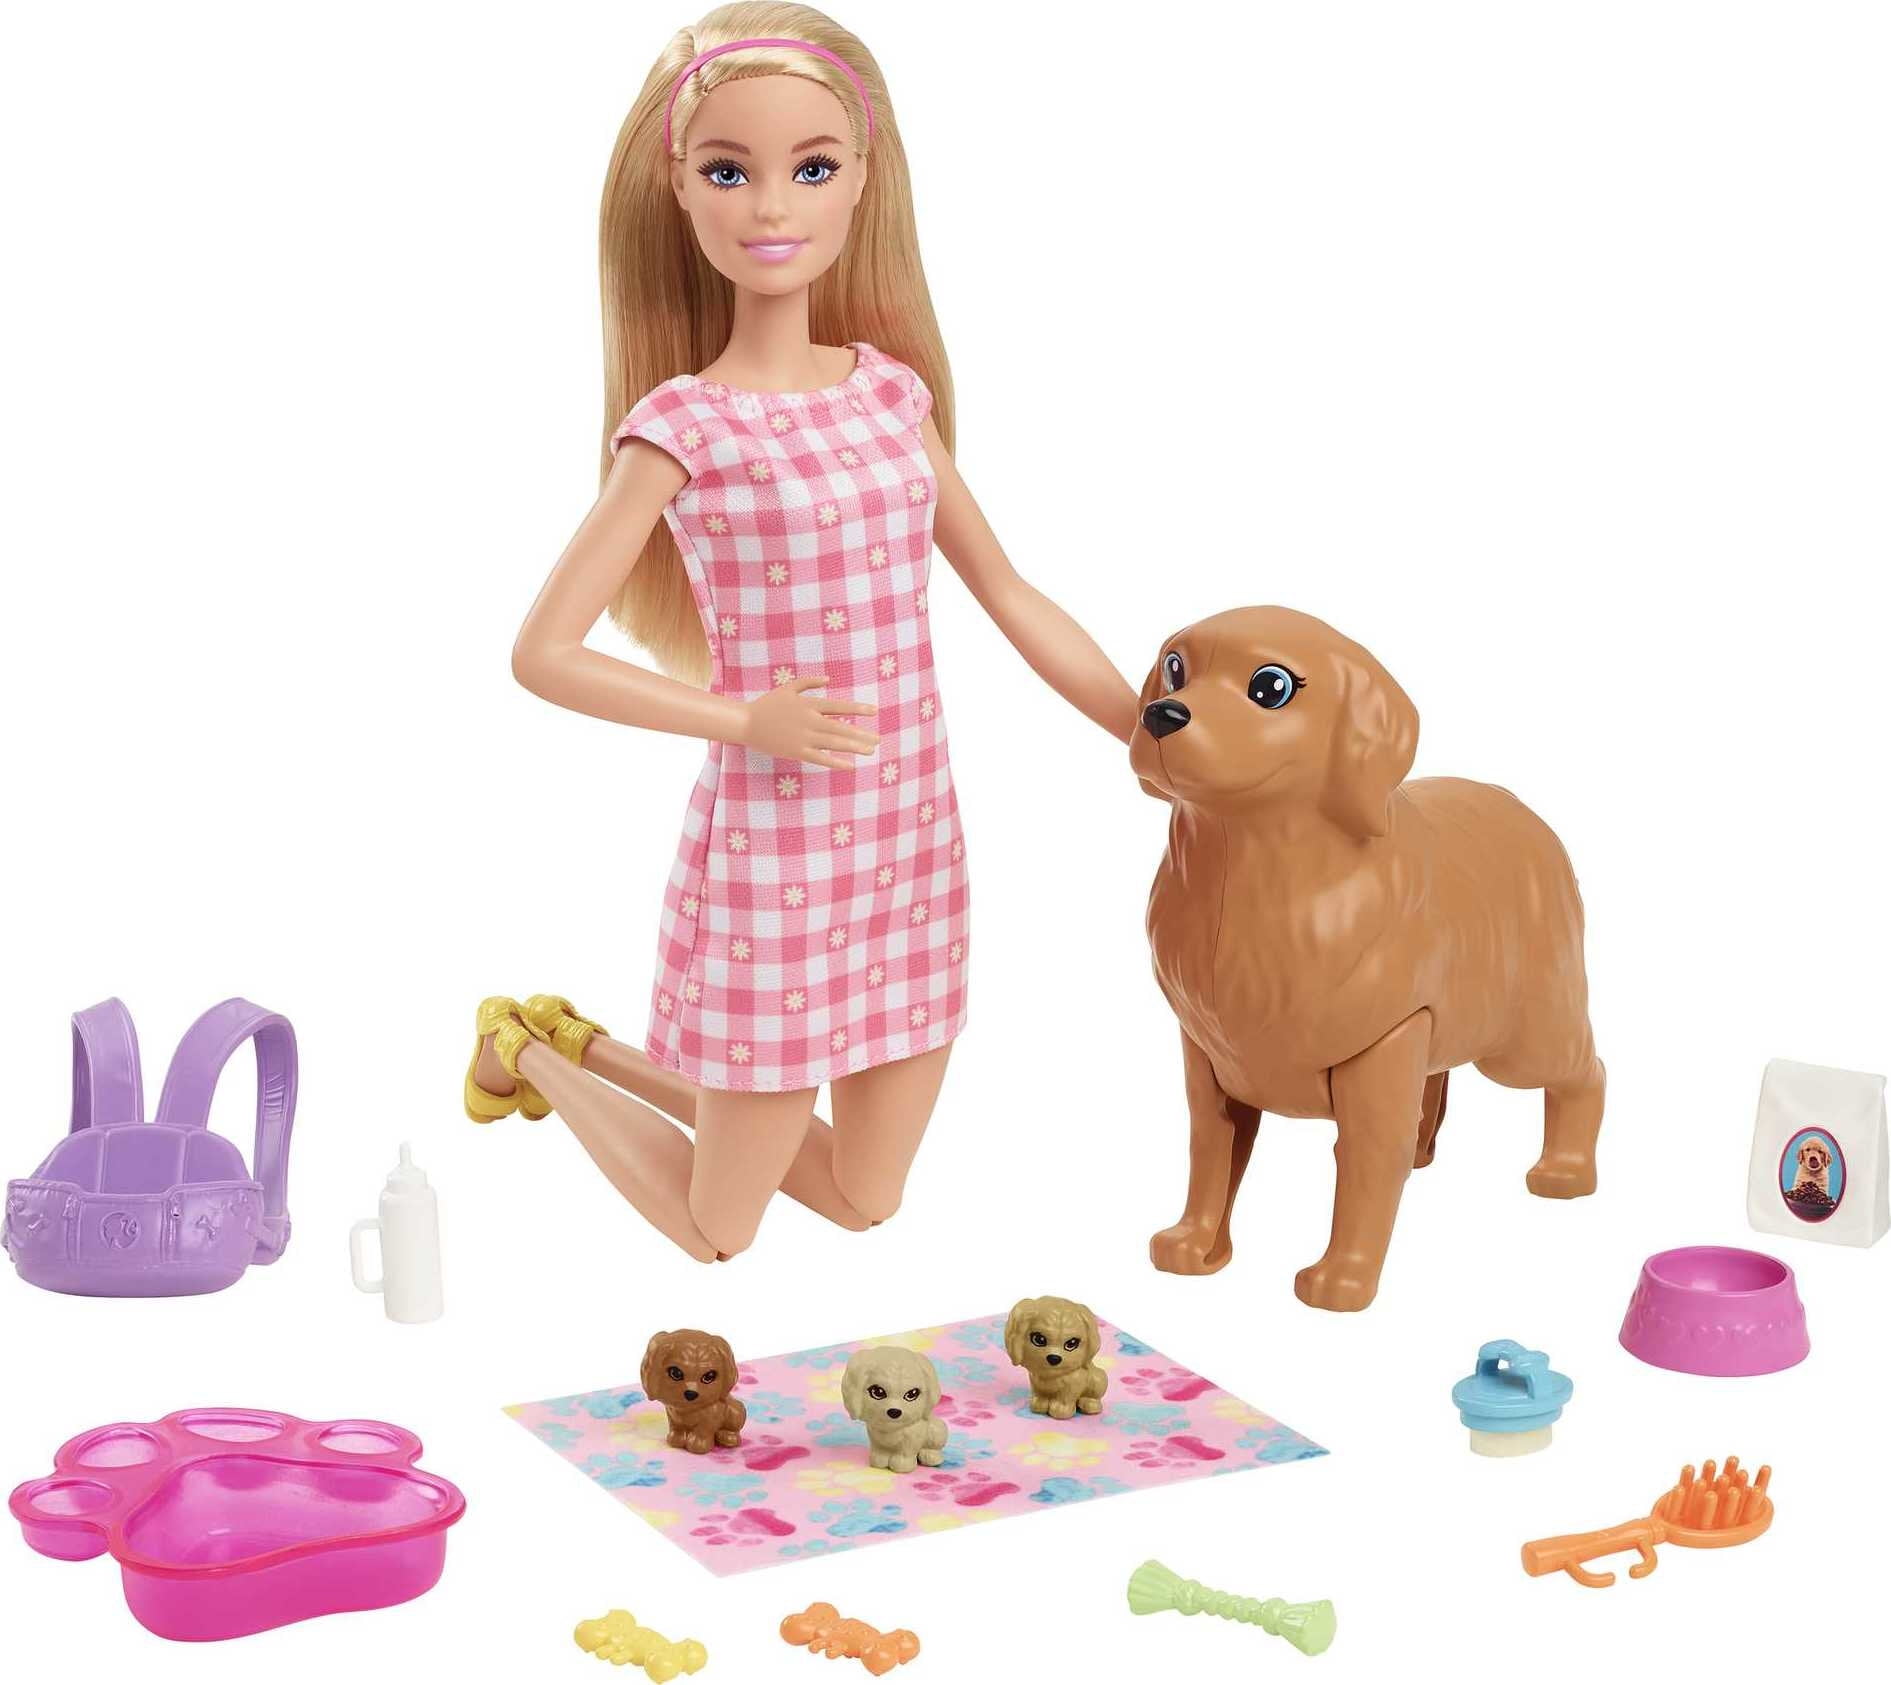 Barbie Baby + Bassinet + Toys + Food + Books + Accessories & More!